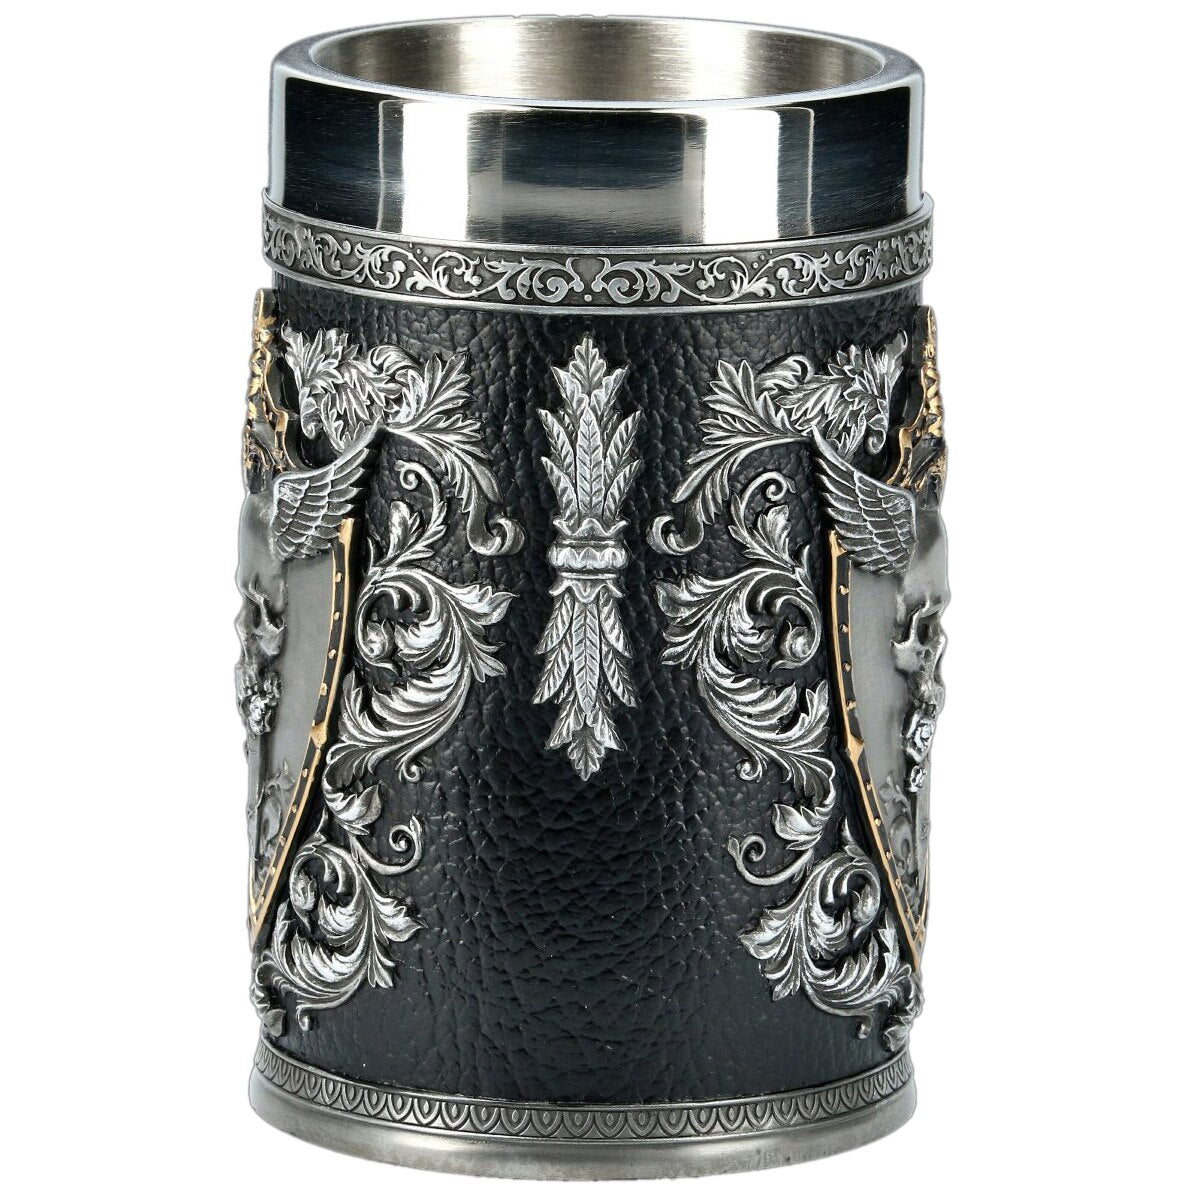 eagle's Crest Steelwing Tankard of beer